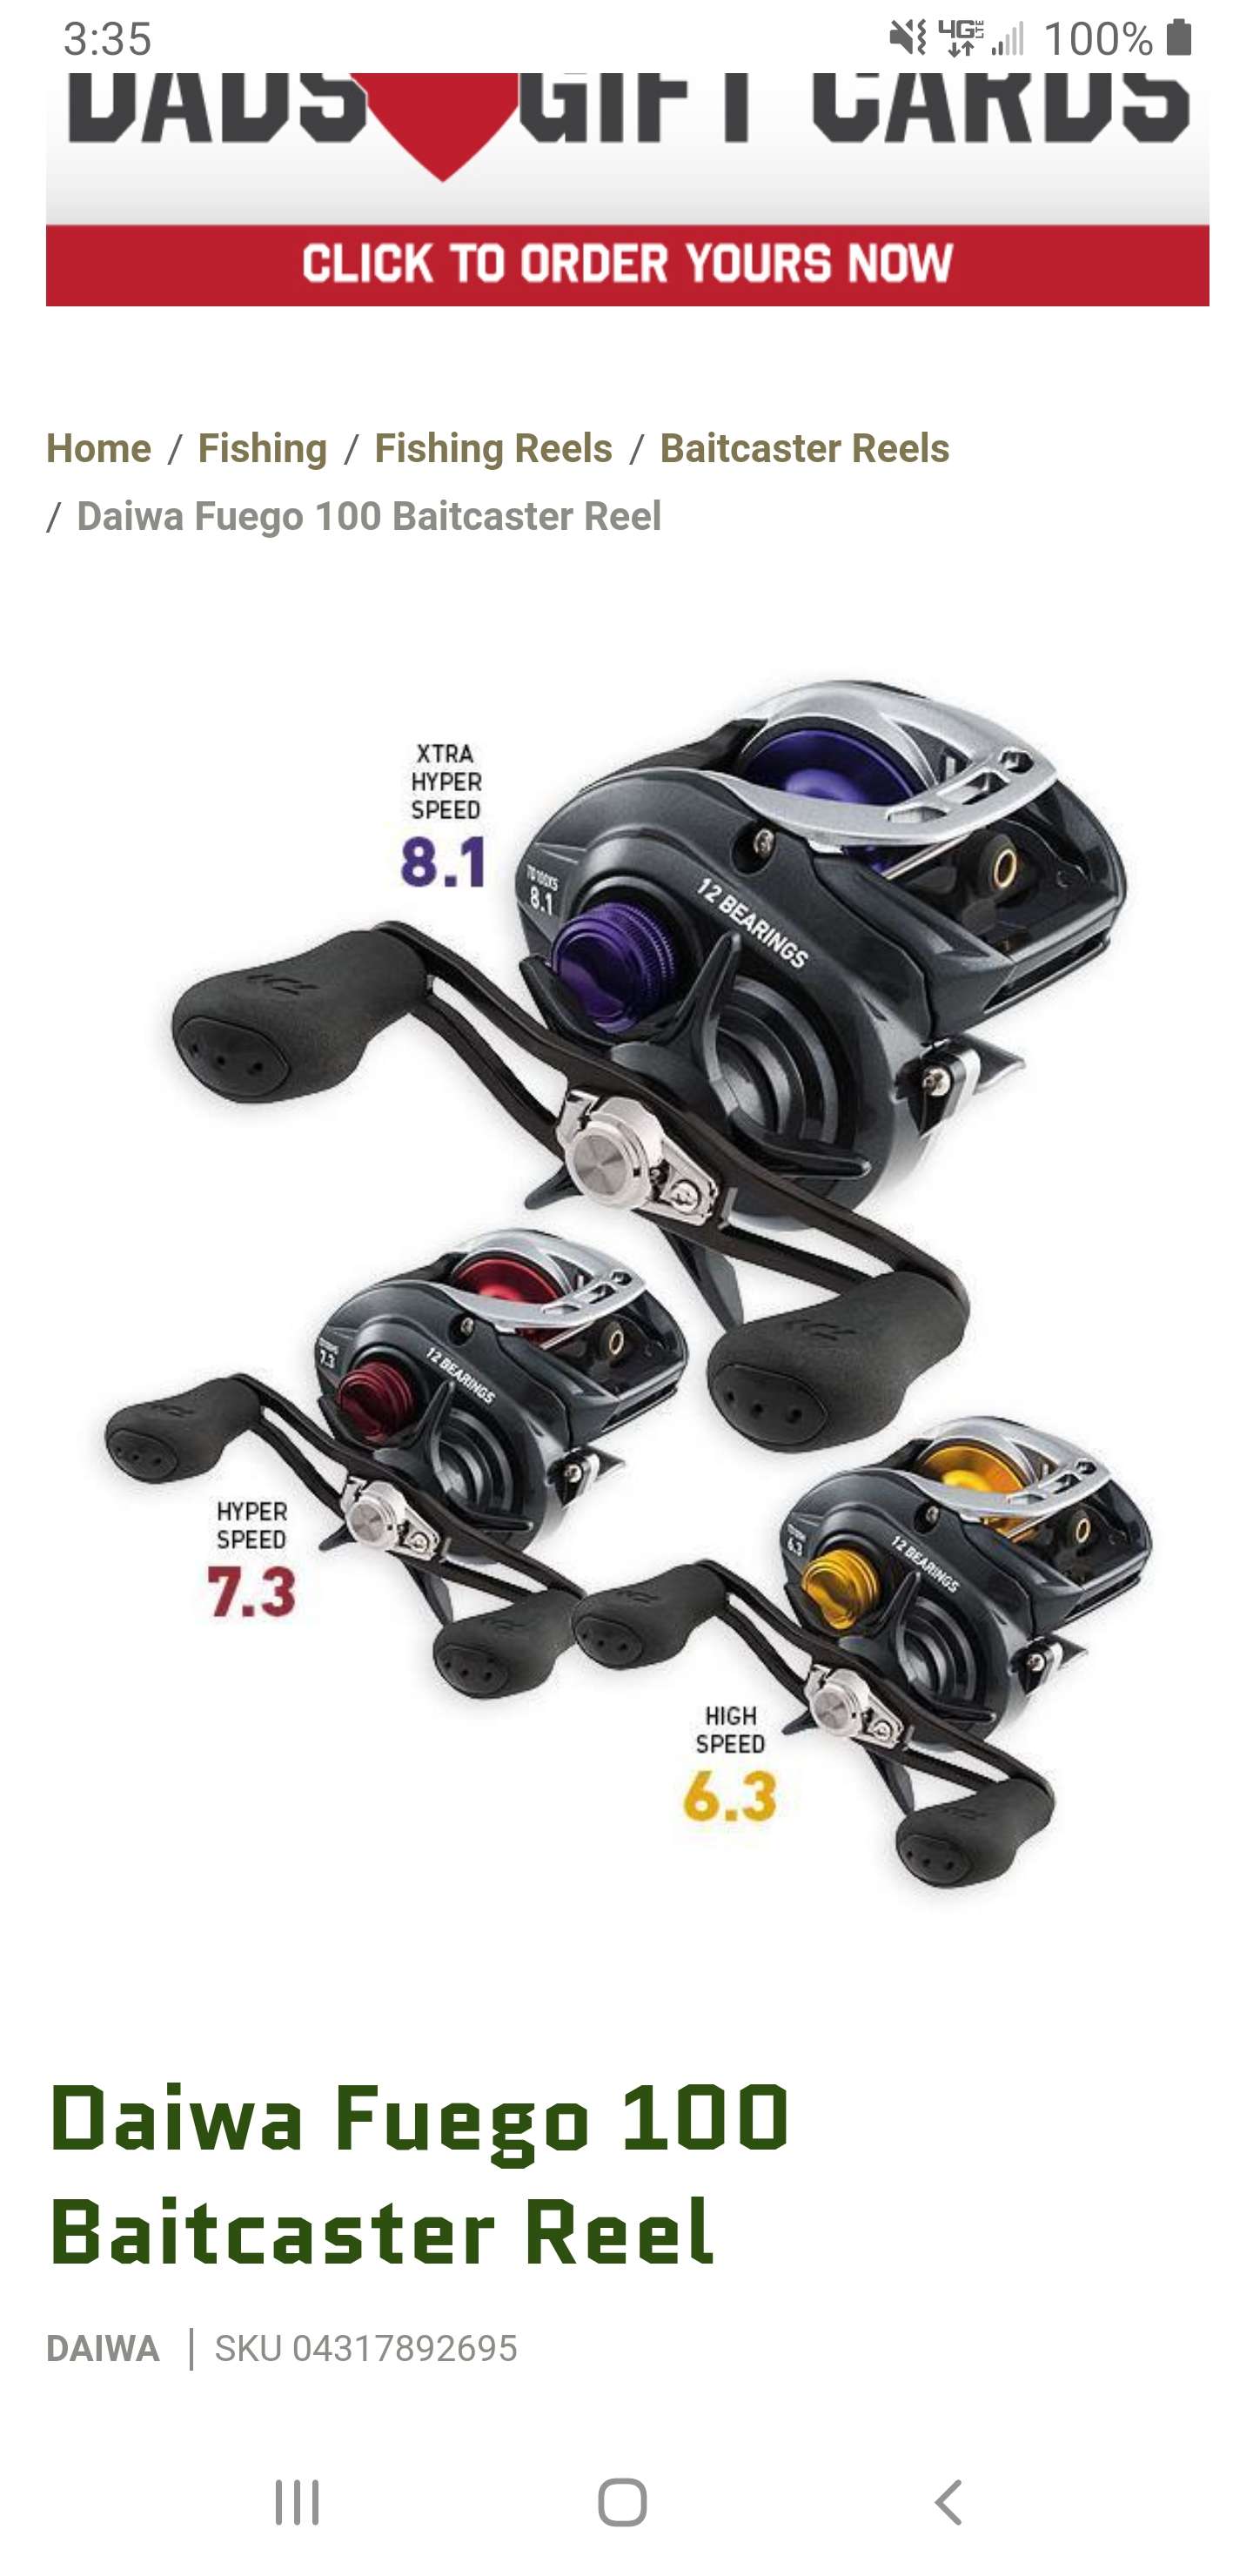 New Daiwa Fuego - Fishing Rods, Reels, Line, and Knots - Bass Fishing Forums